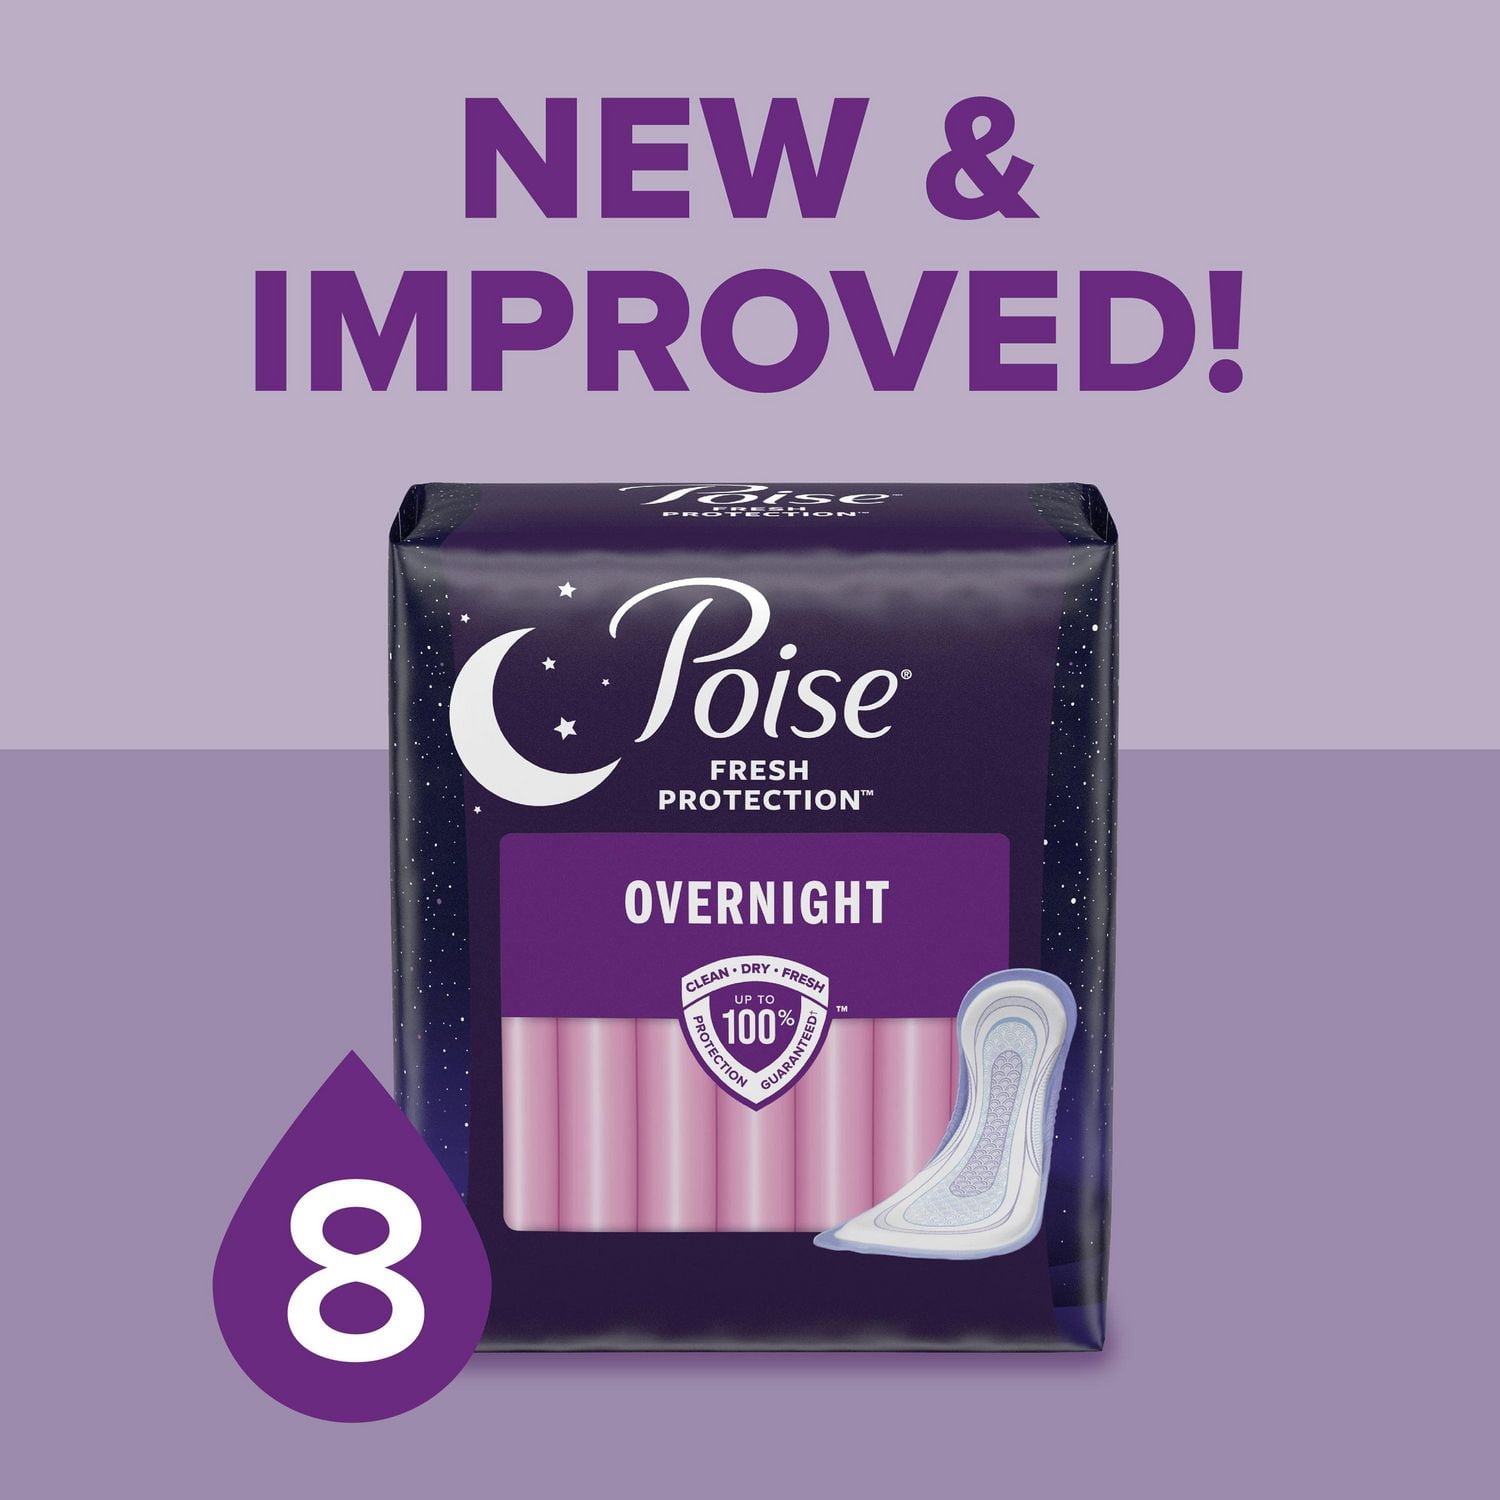 Poise Incontinence Pads for Women/Bladder Leakage Pads/Bladder